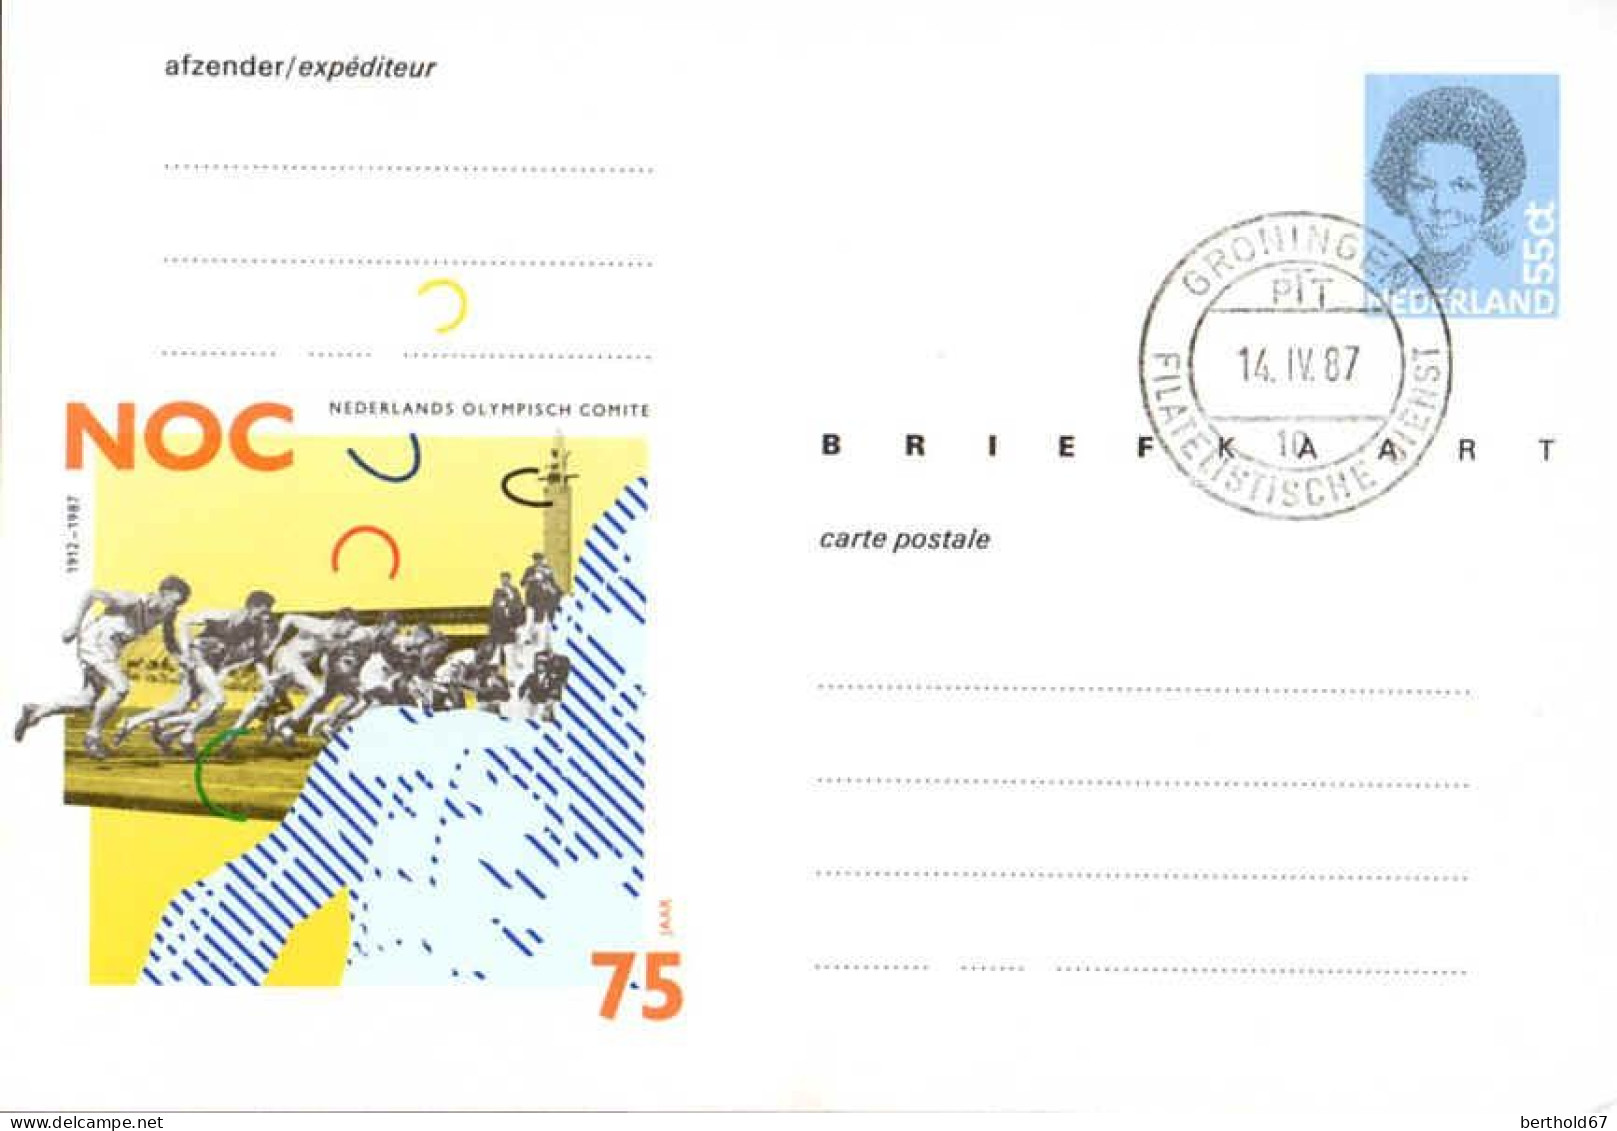 Pays-Bas Entier-P Obl ( 8) Briefkaart Nederlands Olympisch Comite 148*102 55ct (TB Cachet à Date) - Postal Stationery